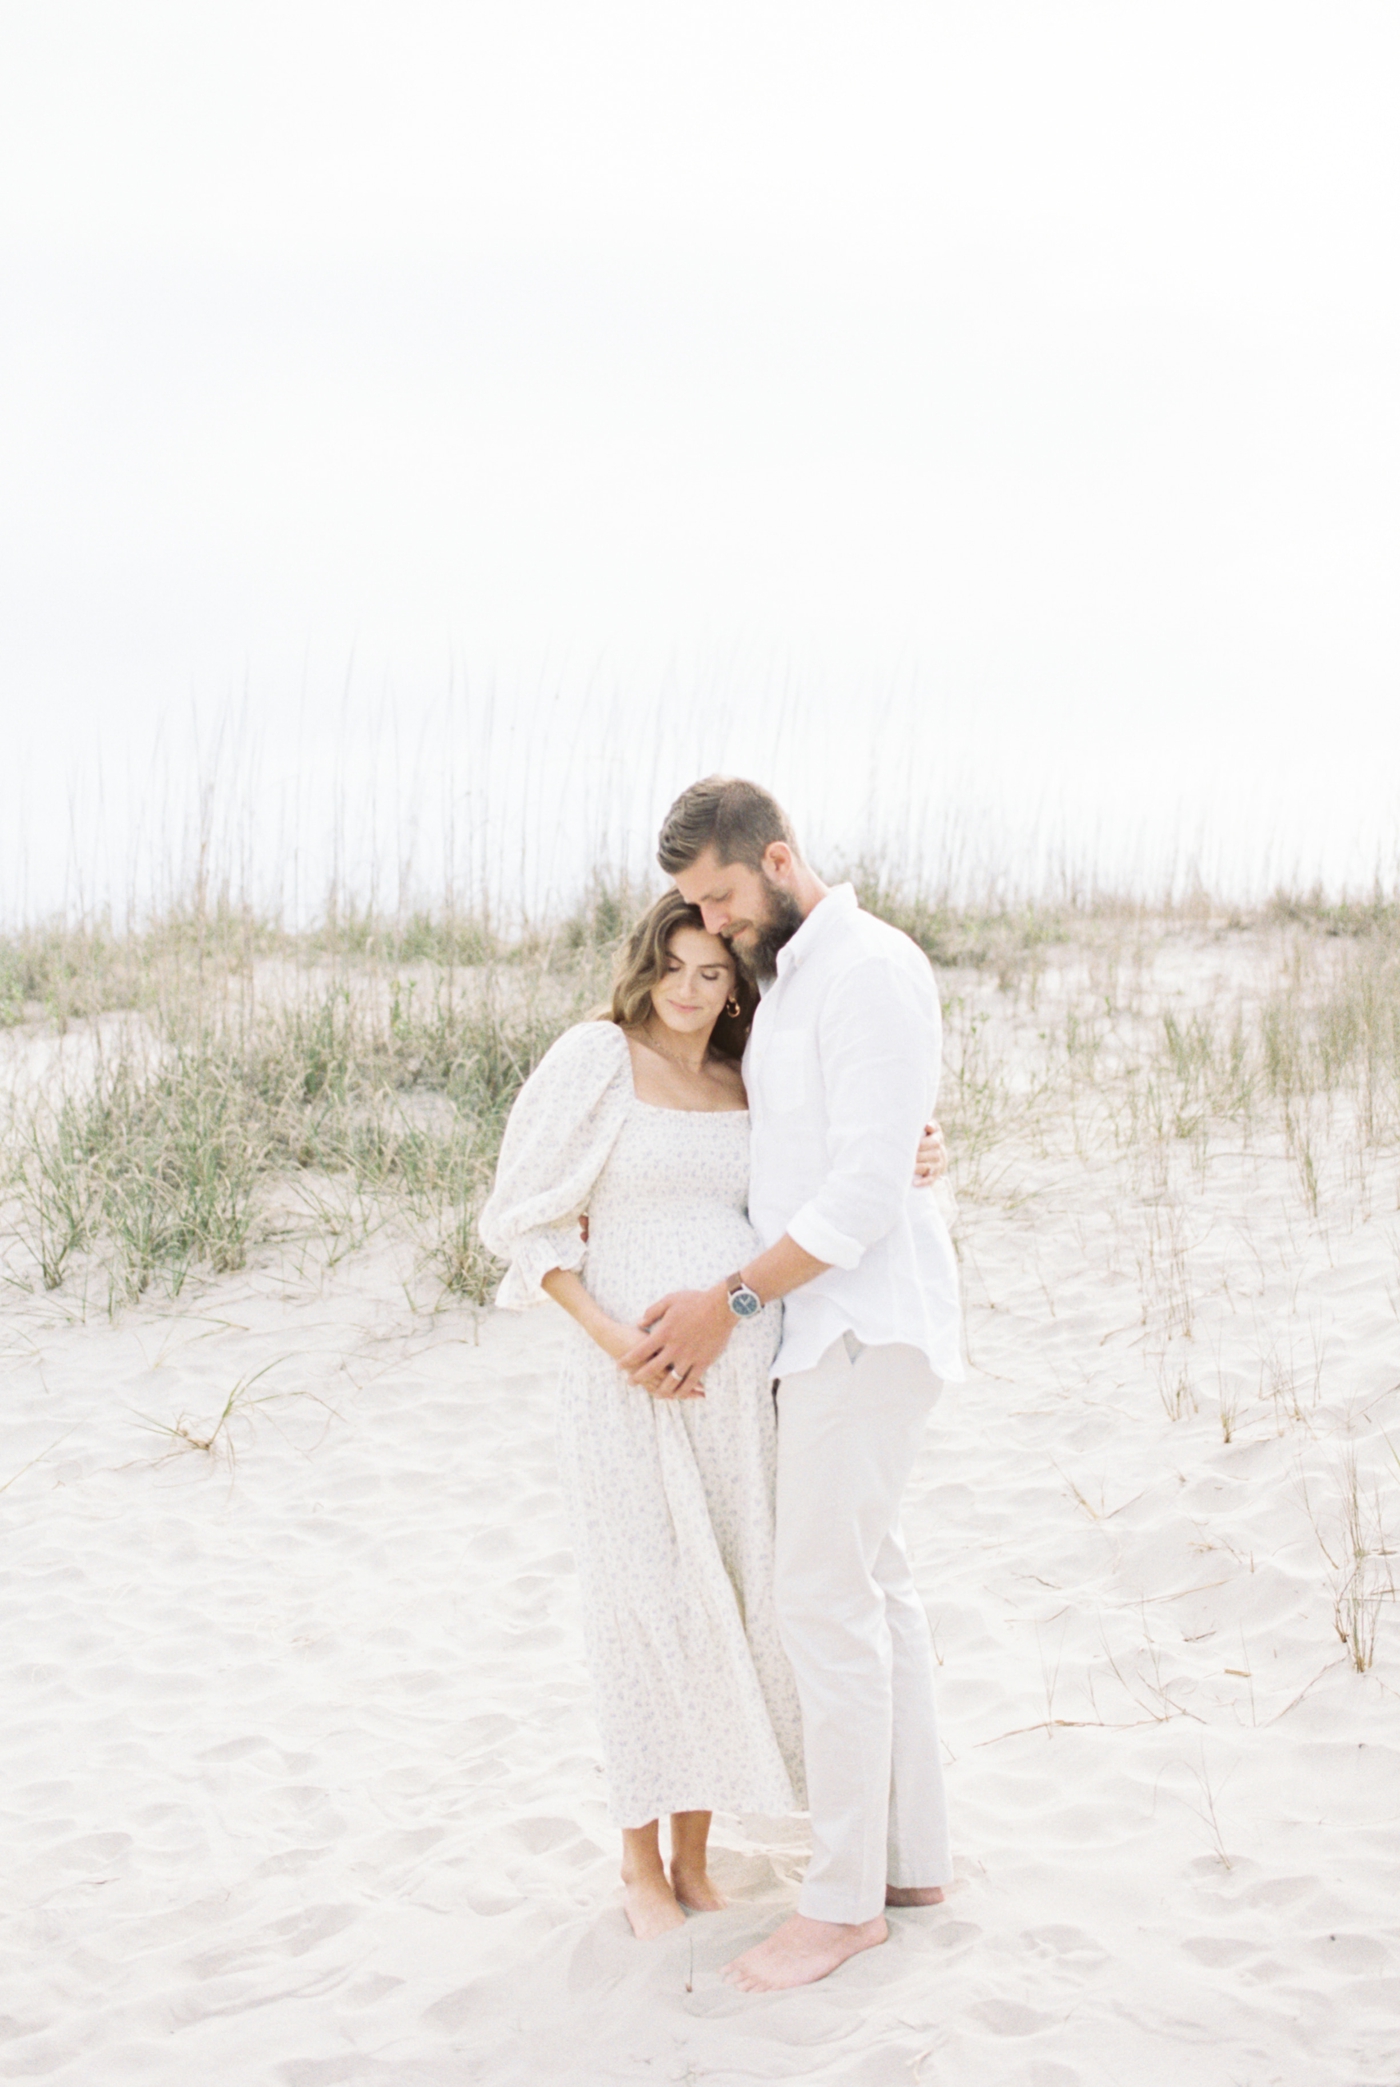 Mother and father to be cradling moms belly at Sullivans Island | Photo by Caitlyn Motycka Photography.